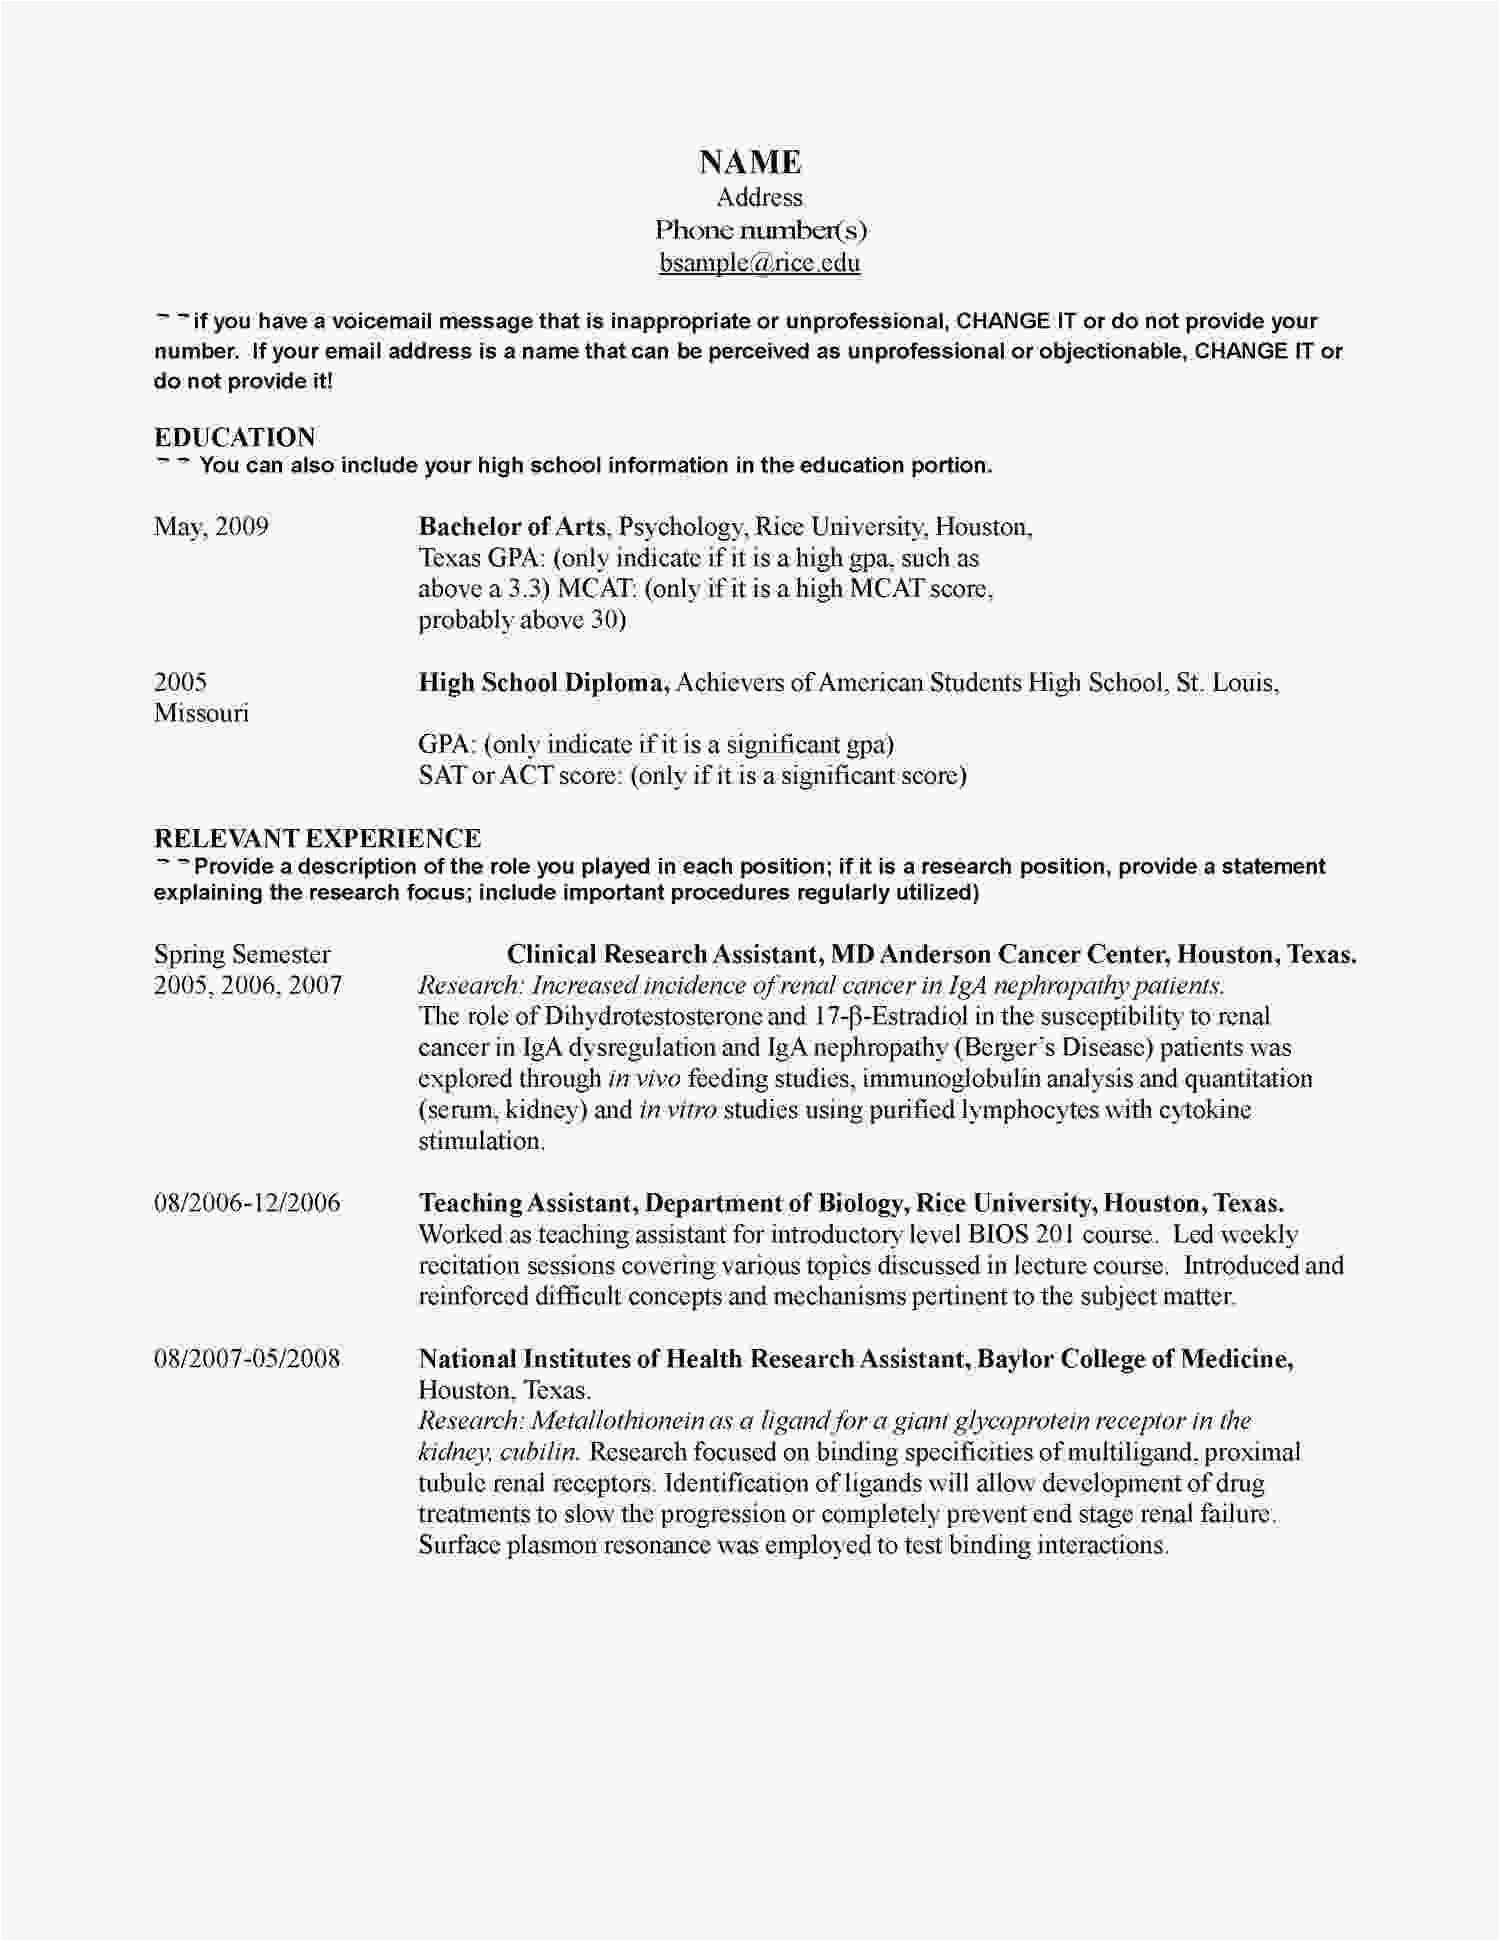 Sample Resume for Ojt Psychology Students Psychology Student Resumes yeterwpartco